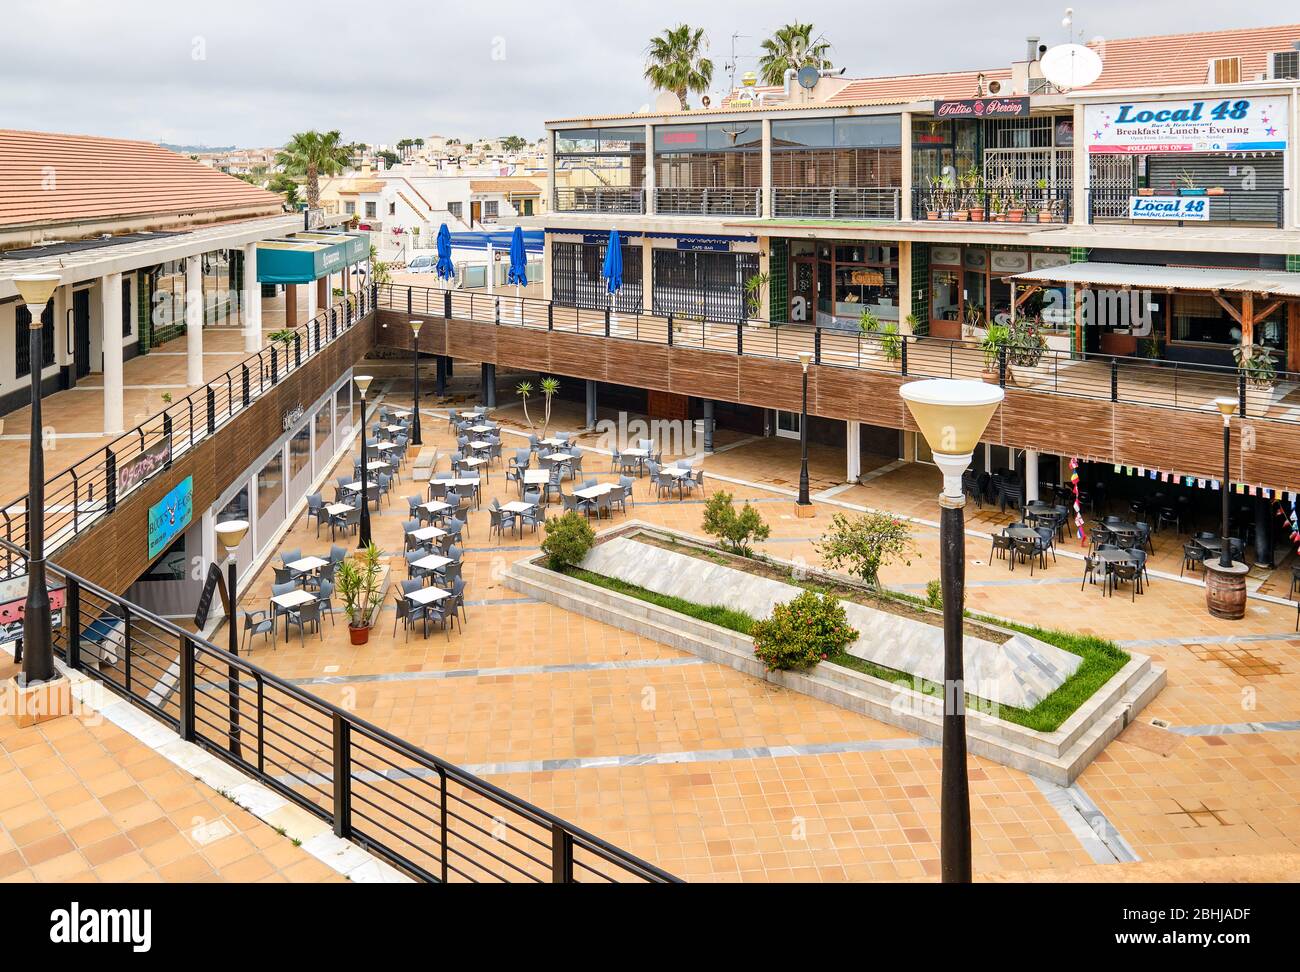 Orihuela, Spain - April 16, 2020: Closed bars restaurants shopping mall commercial area due to corona virus pandemic outbreak Stock Photo